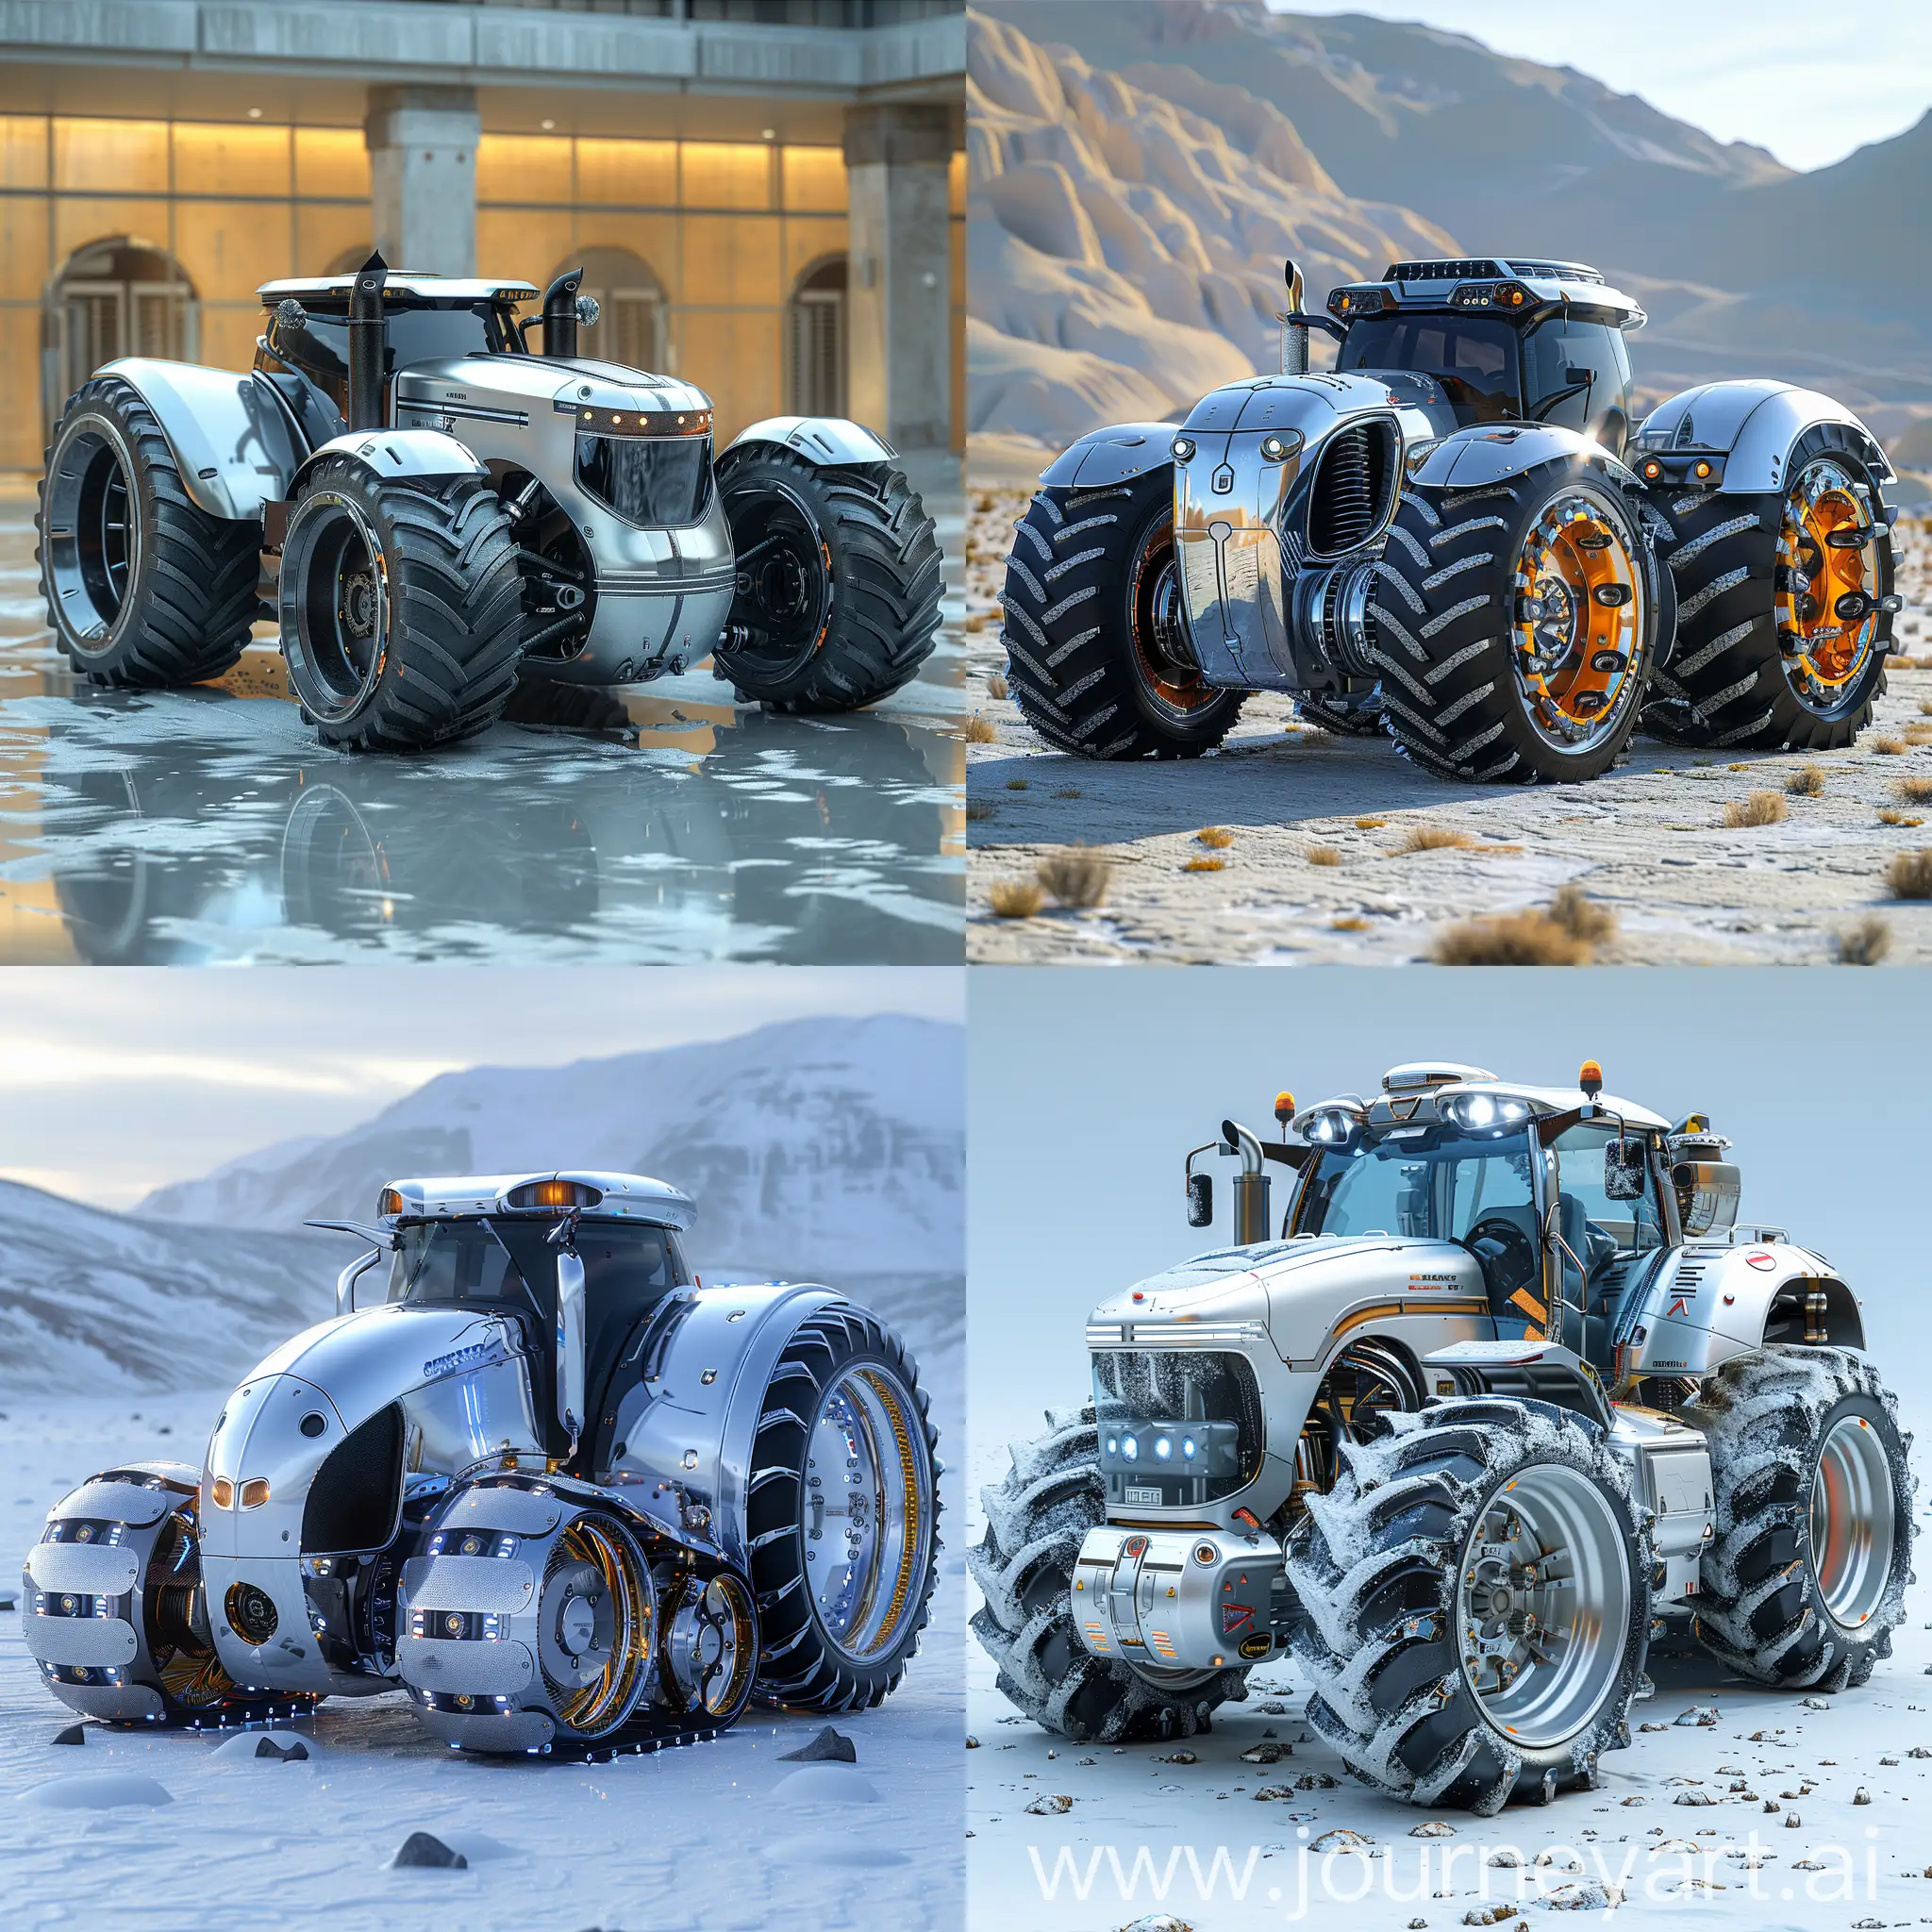 Futuristic-Stainless-Steel-Tractor-with-Reinforced-Materials-and-High-Tech-Features